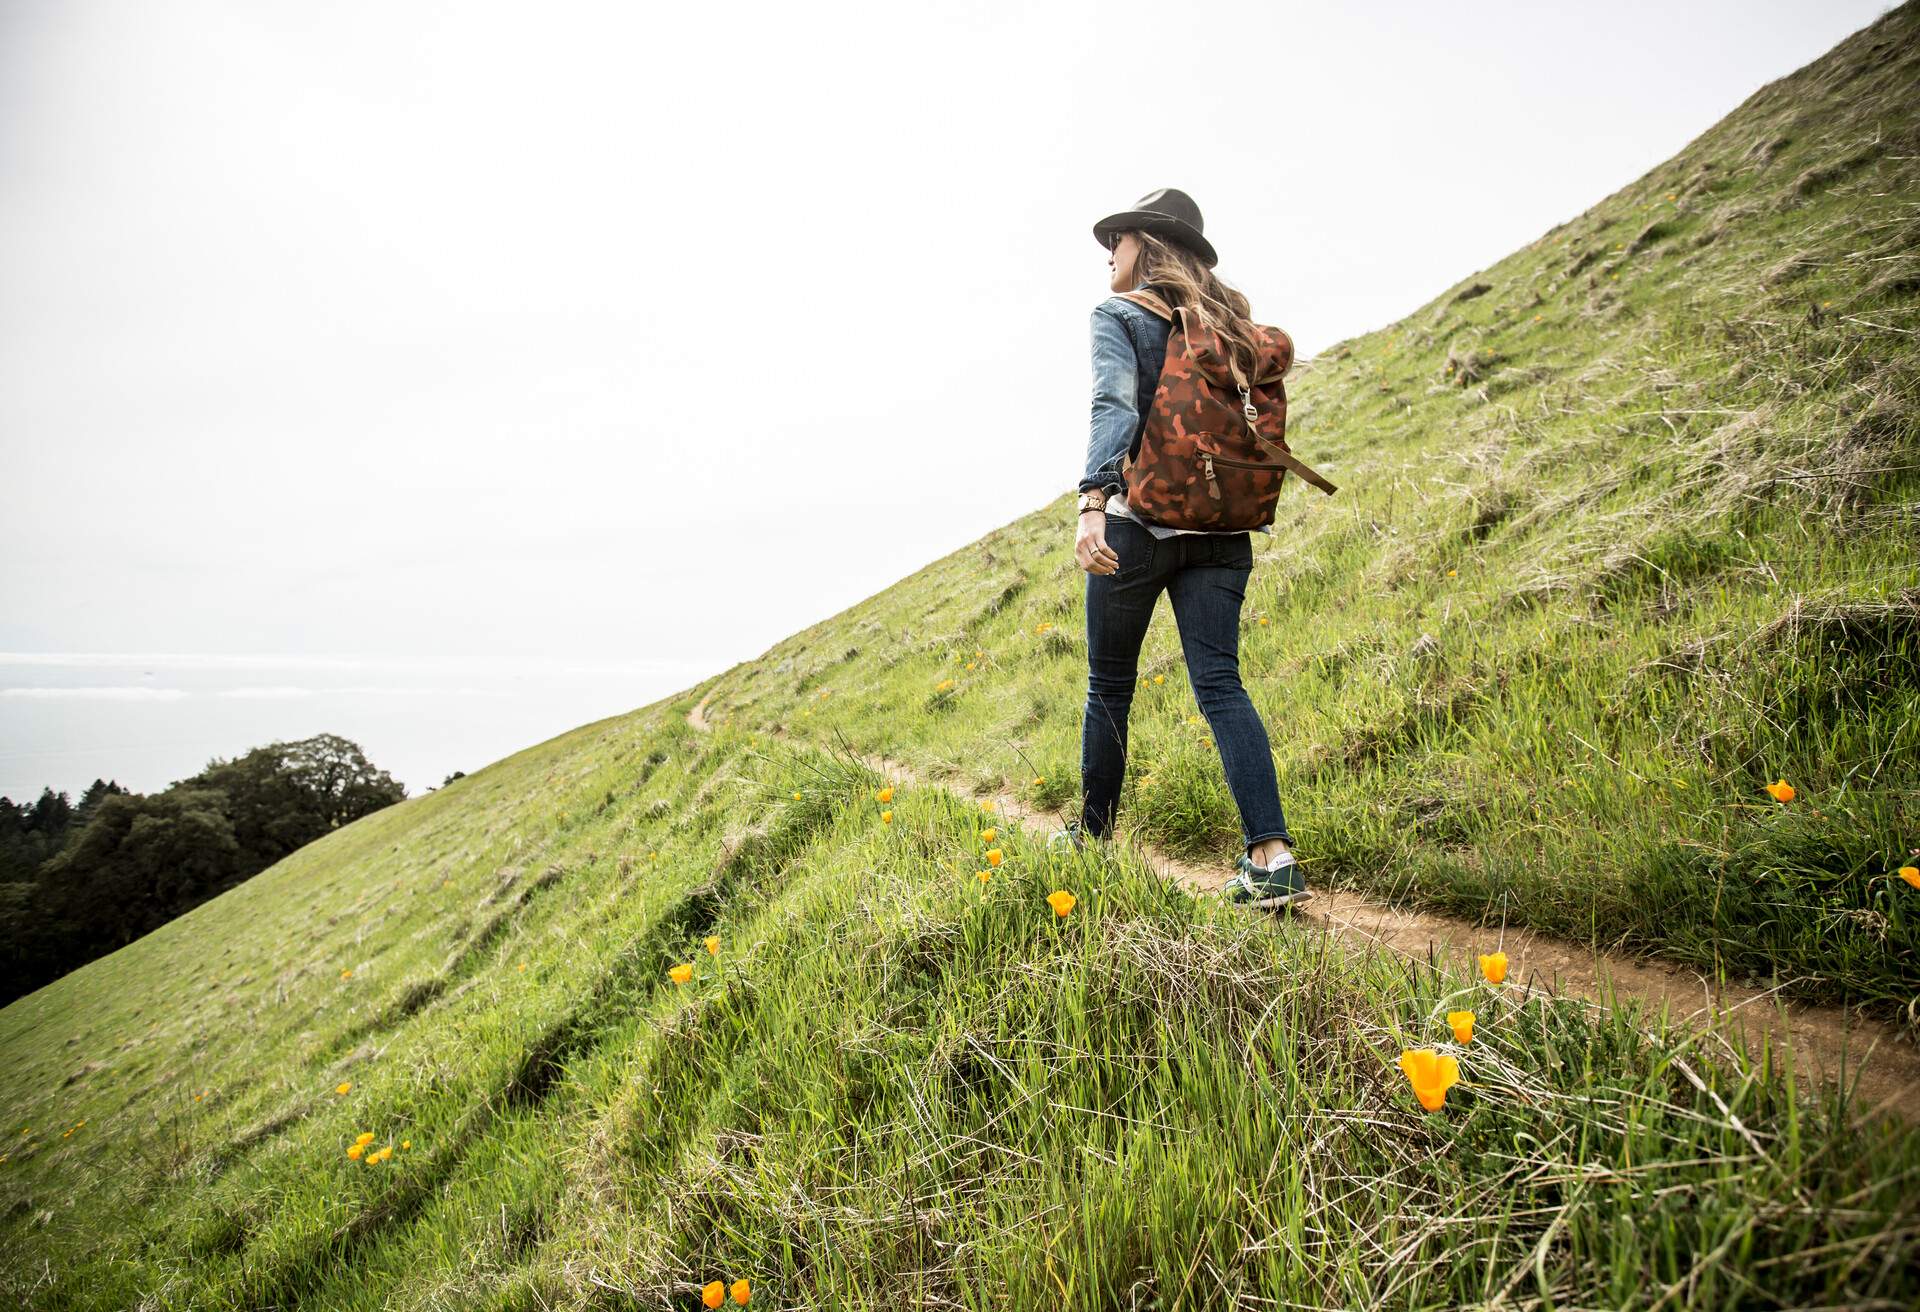 DEST_USA_CA_SAN-FRANCISCO_WOMAN_WALKING-ON_LOOKOUT_THEME_NATURE_HIKING_GettyImages-555776253